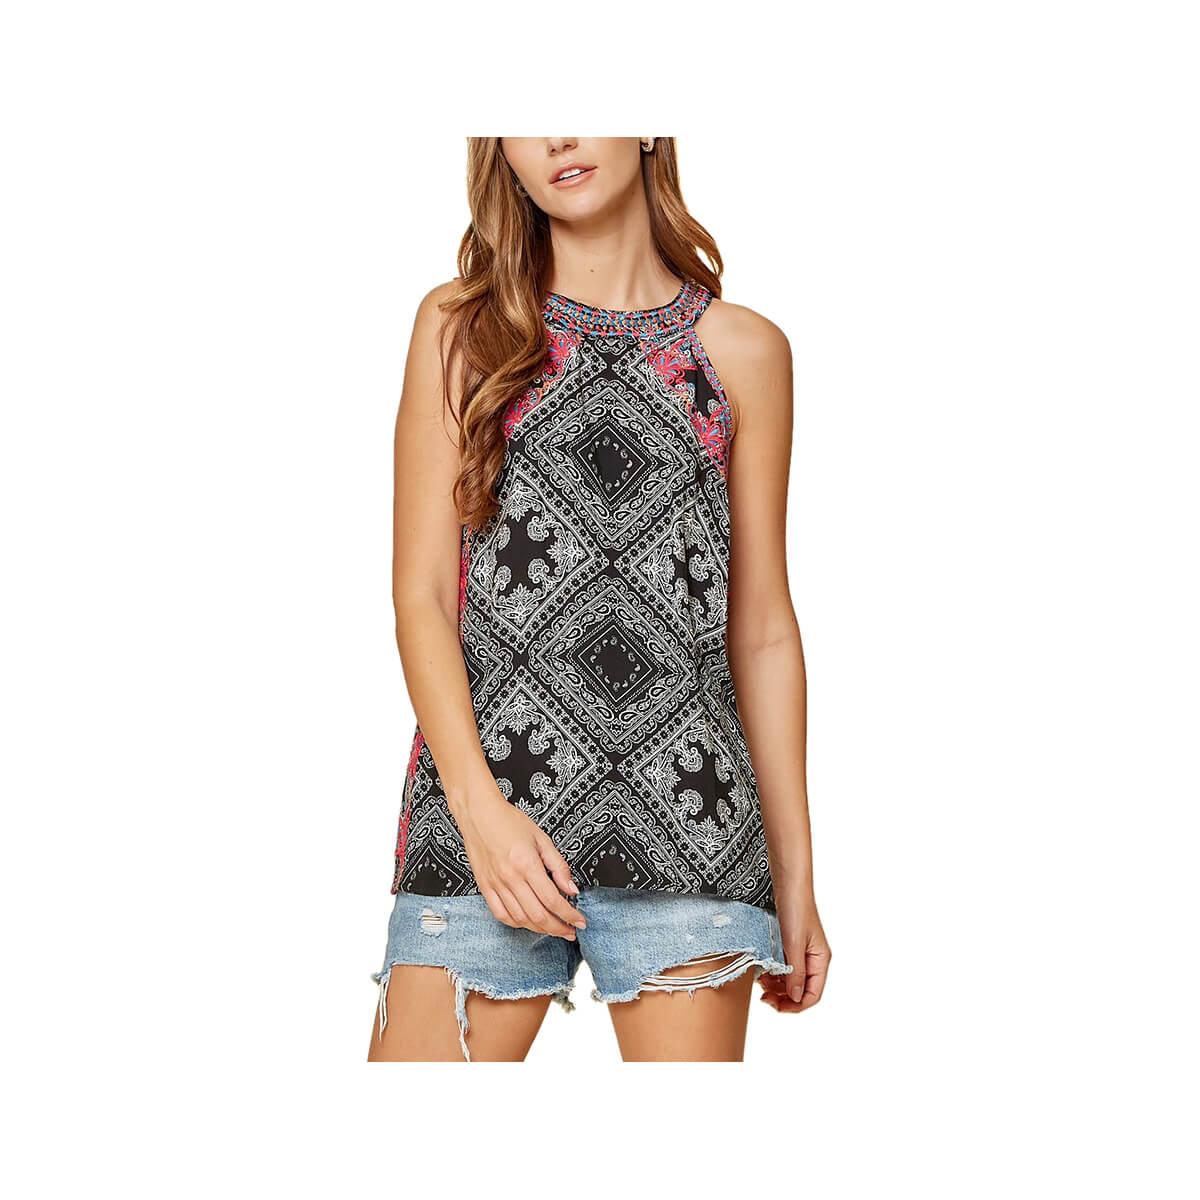  Women's Embroidered Sleeveless Print Top